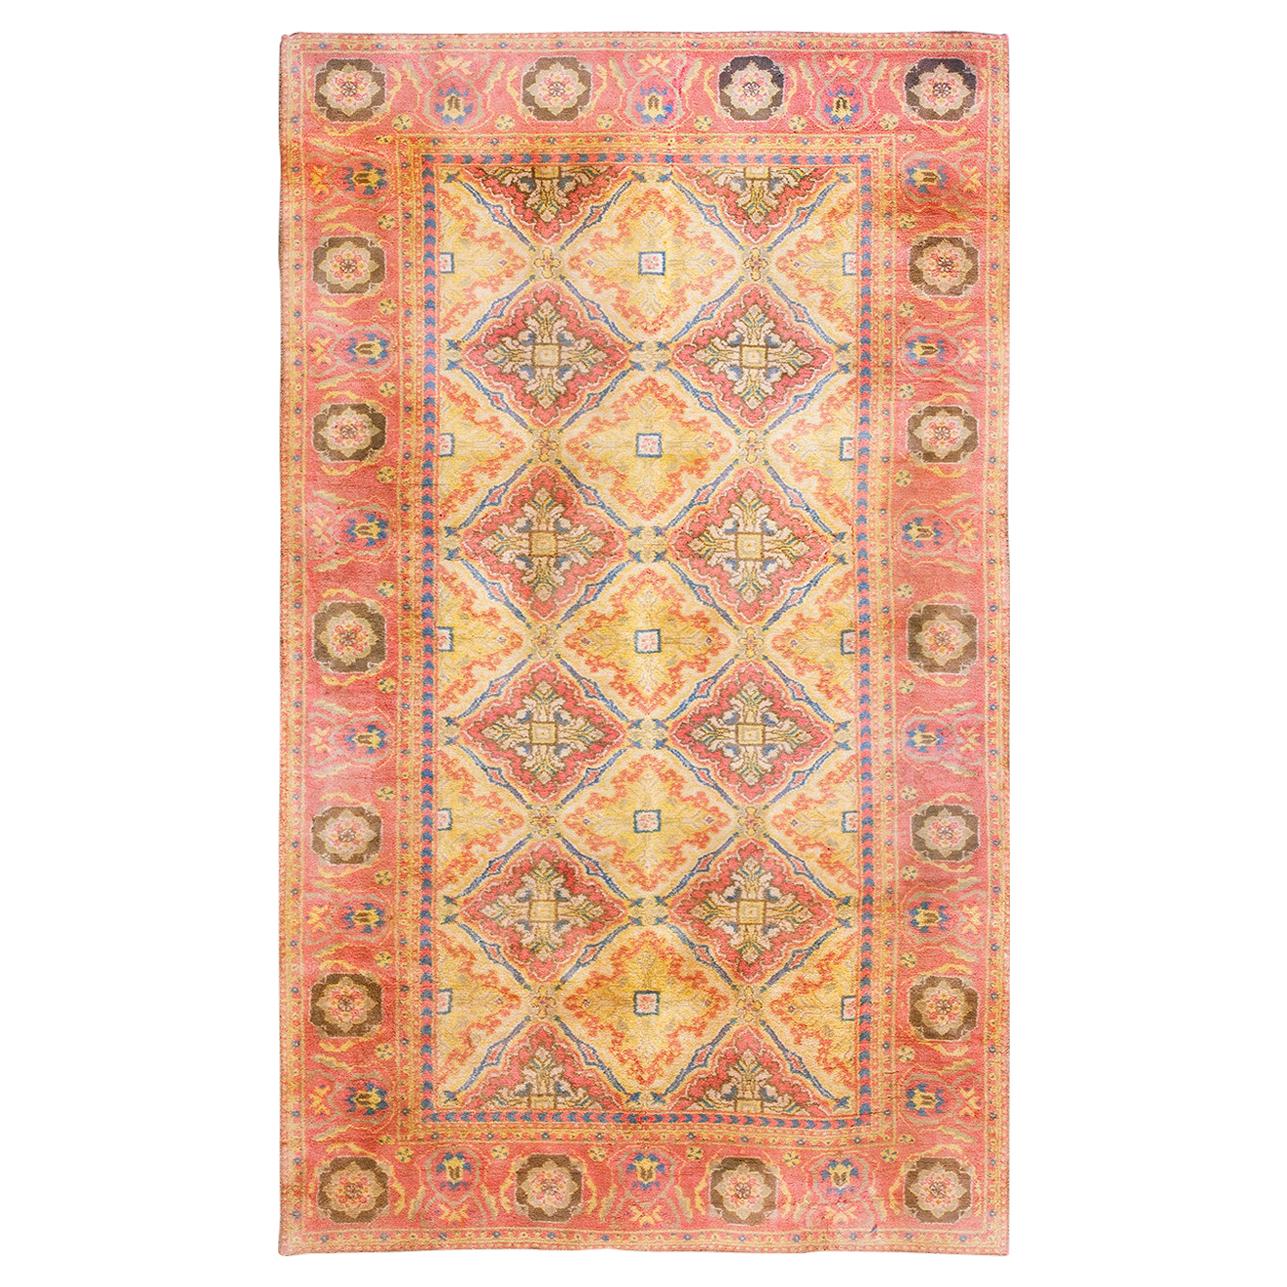 Early 20th Century Cotton Agra Carpet ( 4' x 7' - 122 x 215 cm ) For Sale